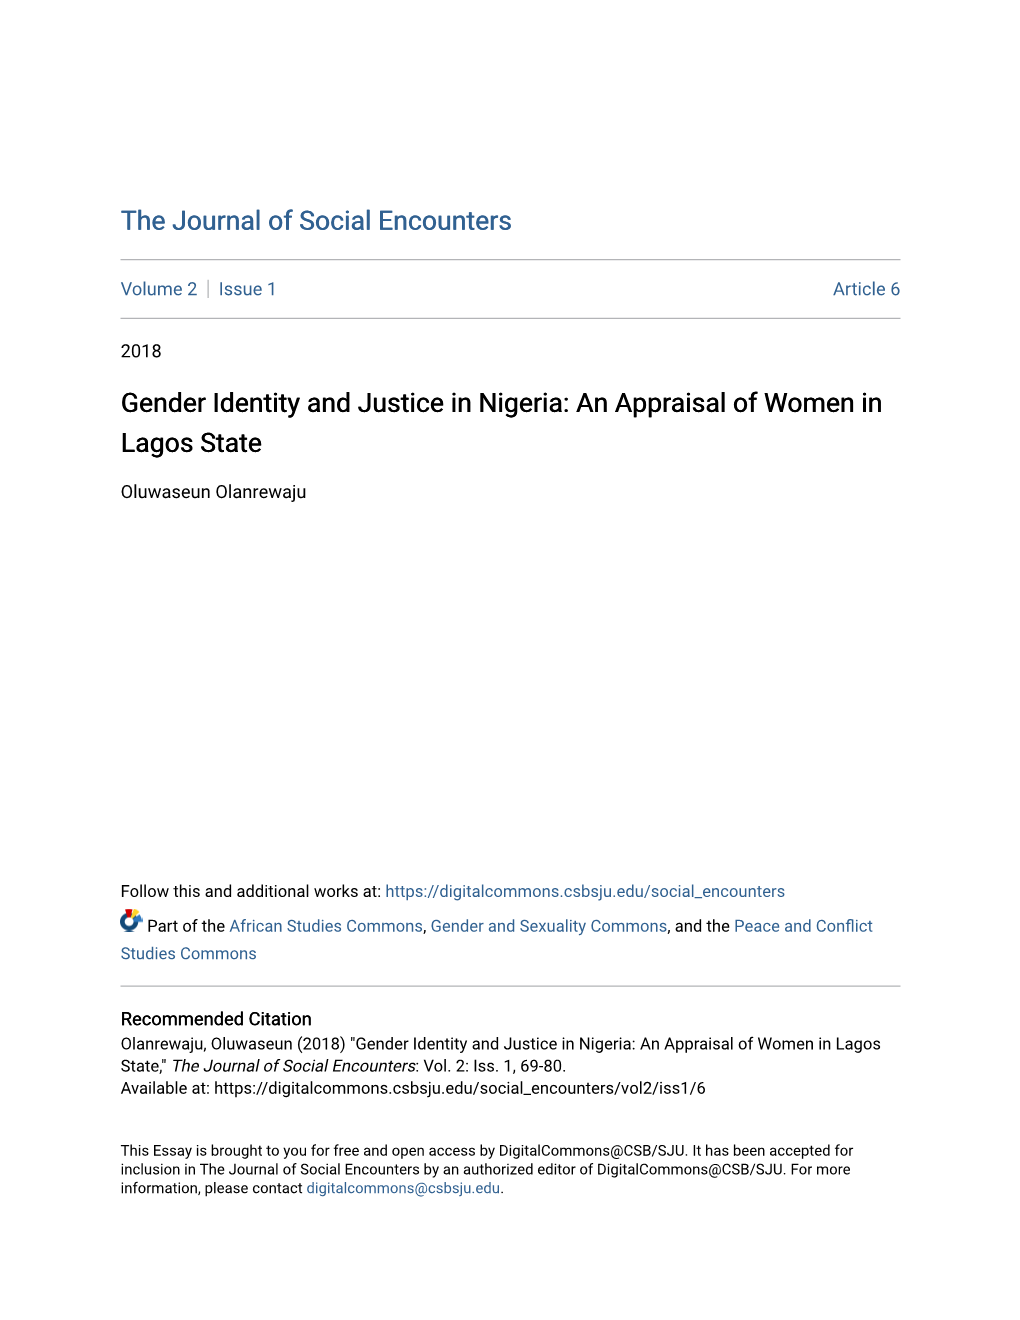 Gender Identity and Justice in Nigeria: an Appraisal of Women in Lagos State